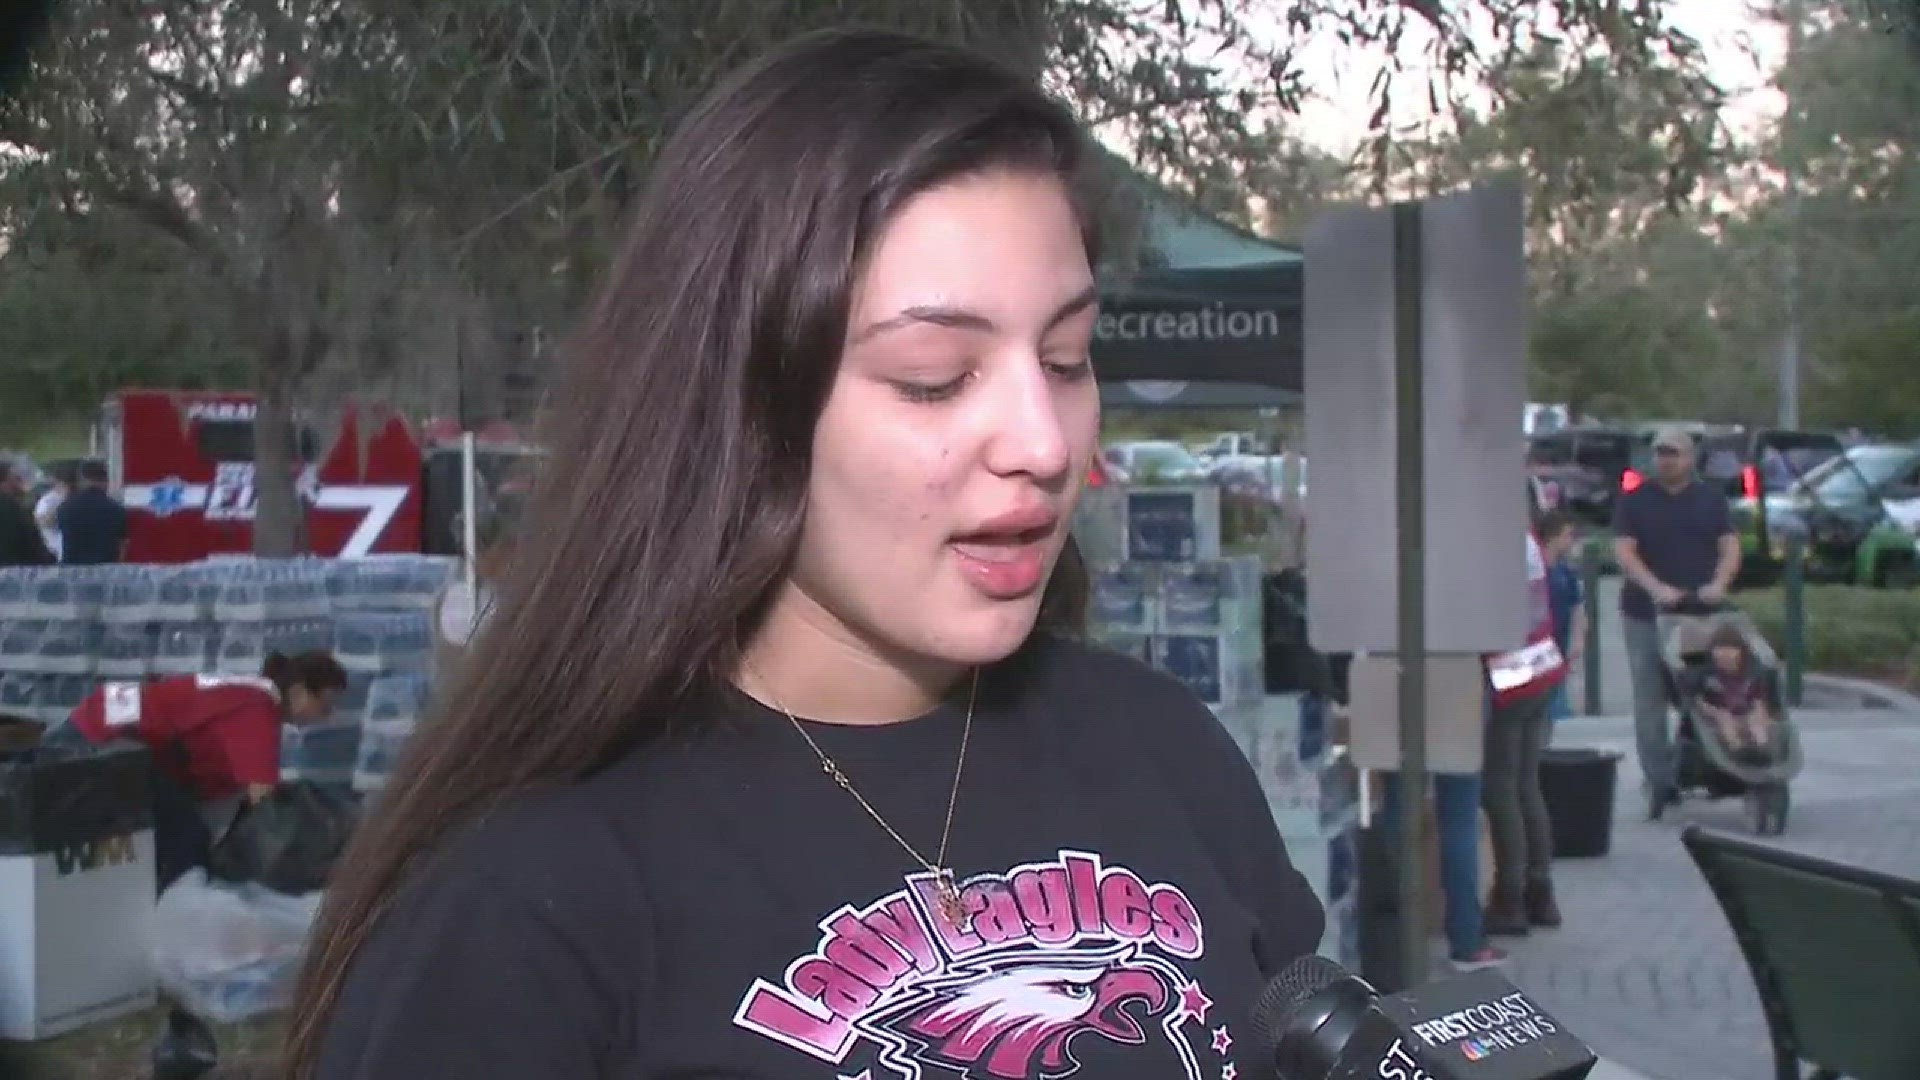 A Stonman Douglas student describes her grieve during a vigil in Parkland. She left school hours before a shooting their in which 17 people were killed.